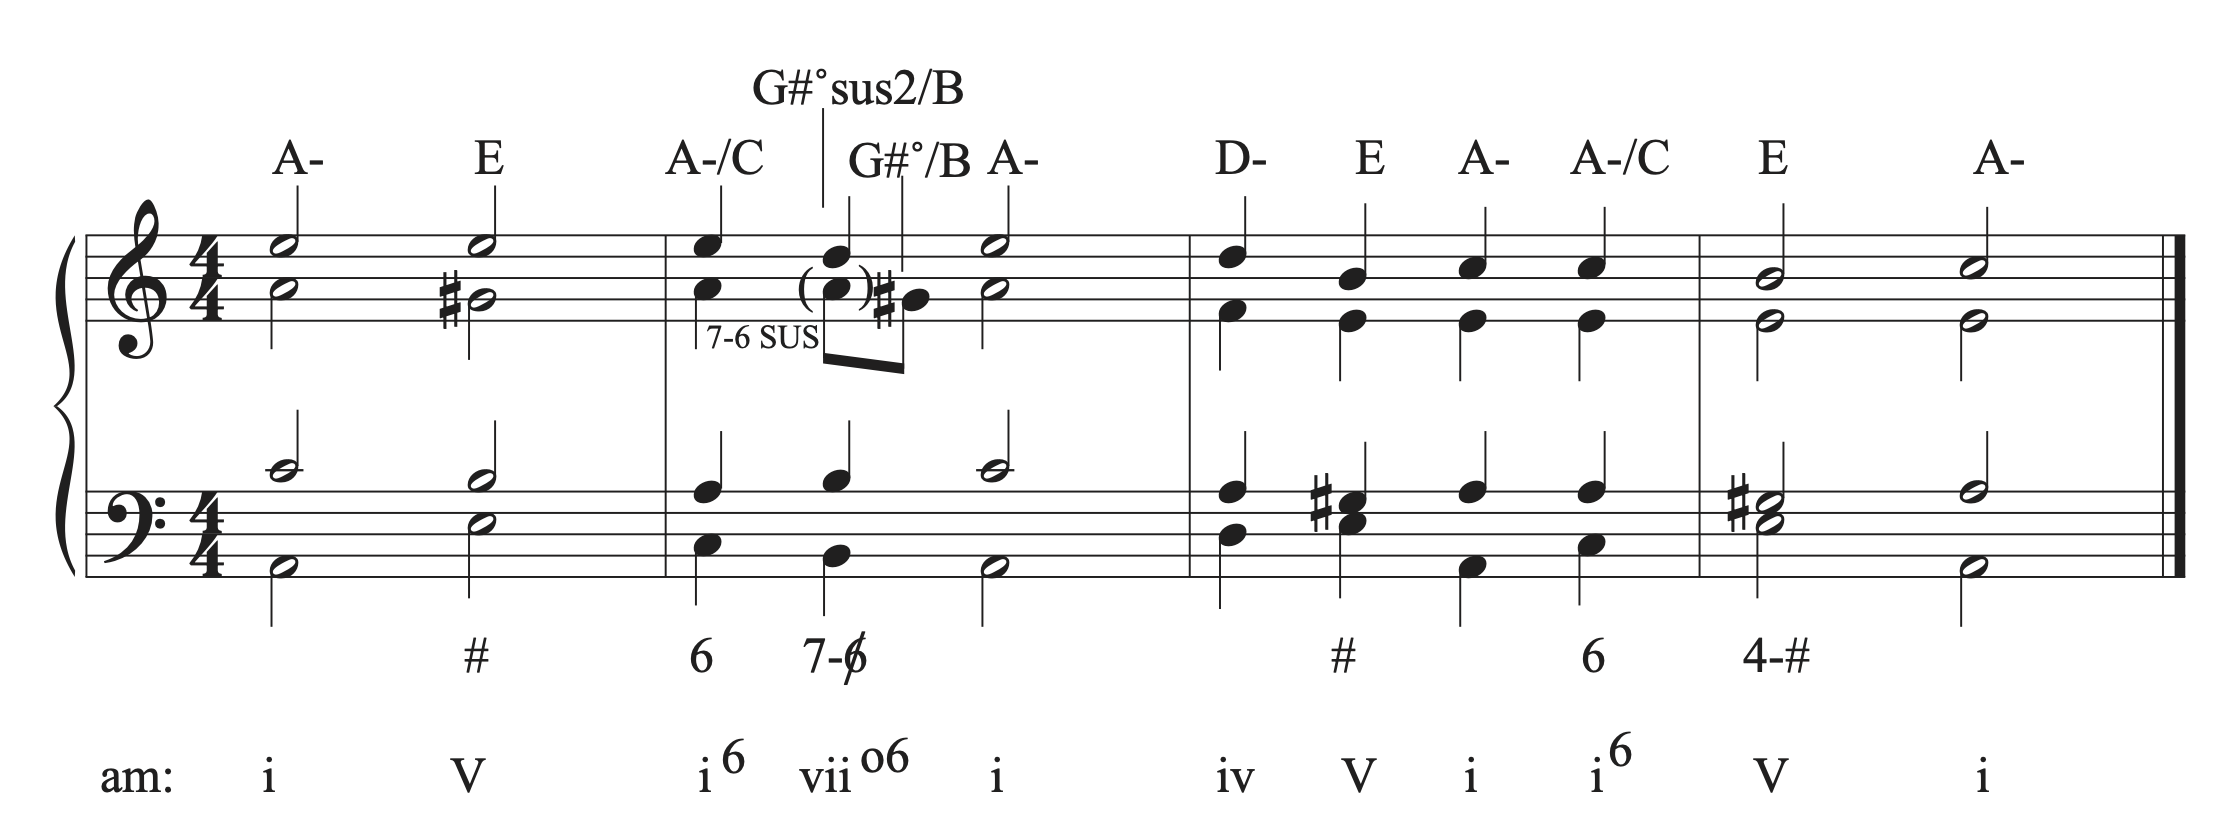 The musical example in A minor with a 7-6 suspension added.